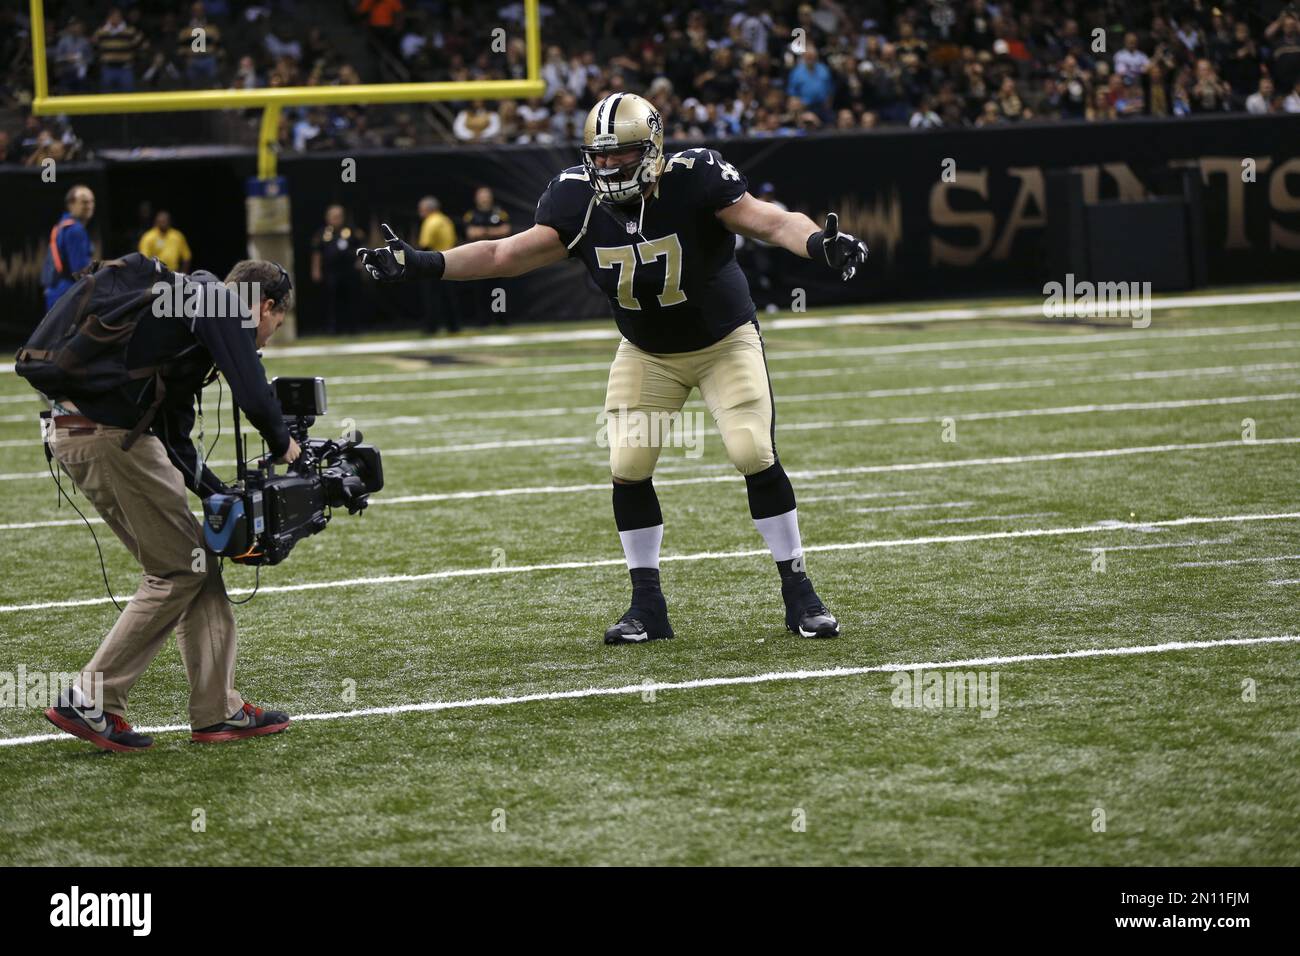 New Orleans Saints tackle Mike McGlynn (77) leads the crown in a